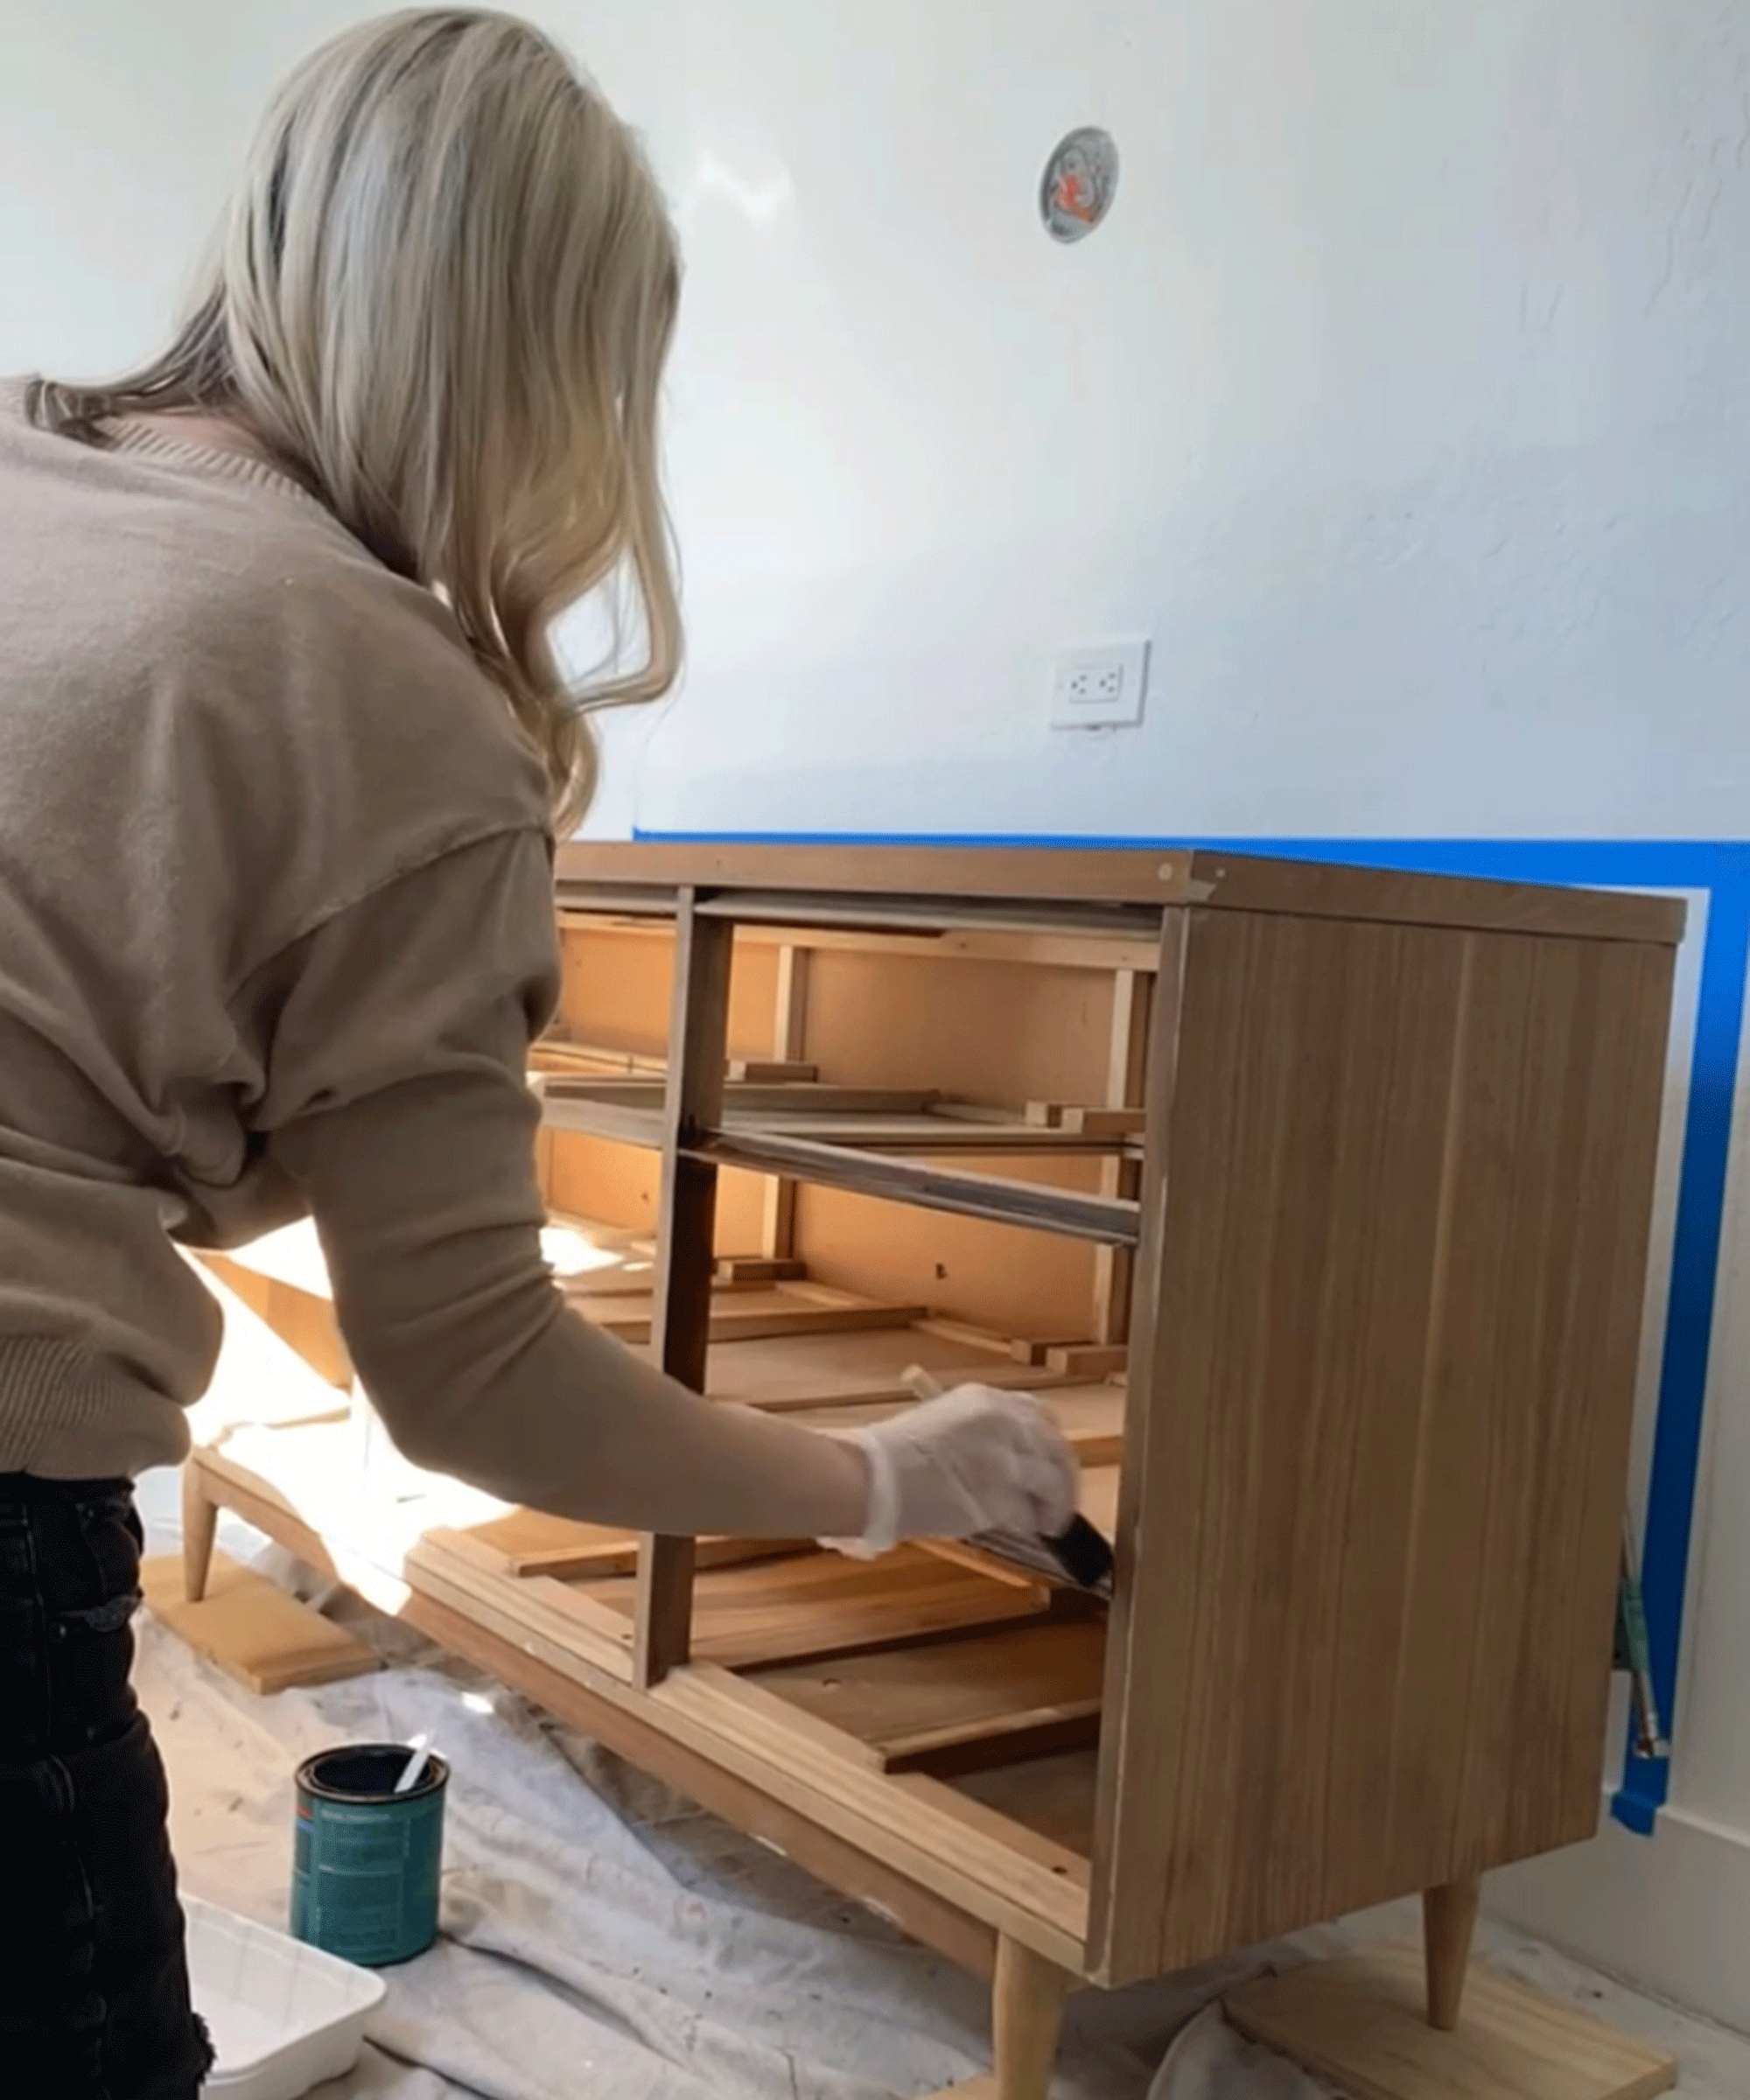 Brooke Waite treating wooden dresser vanity with gel stain and polycrylic treatments